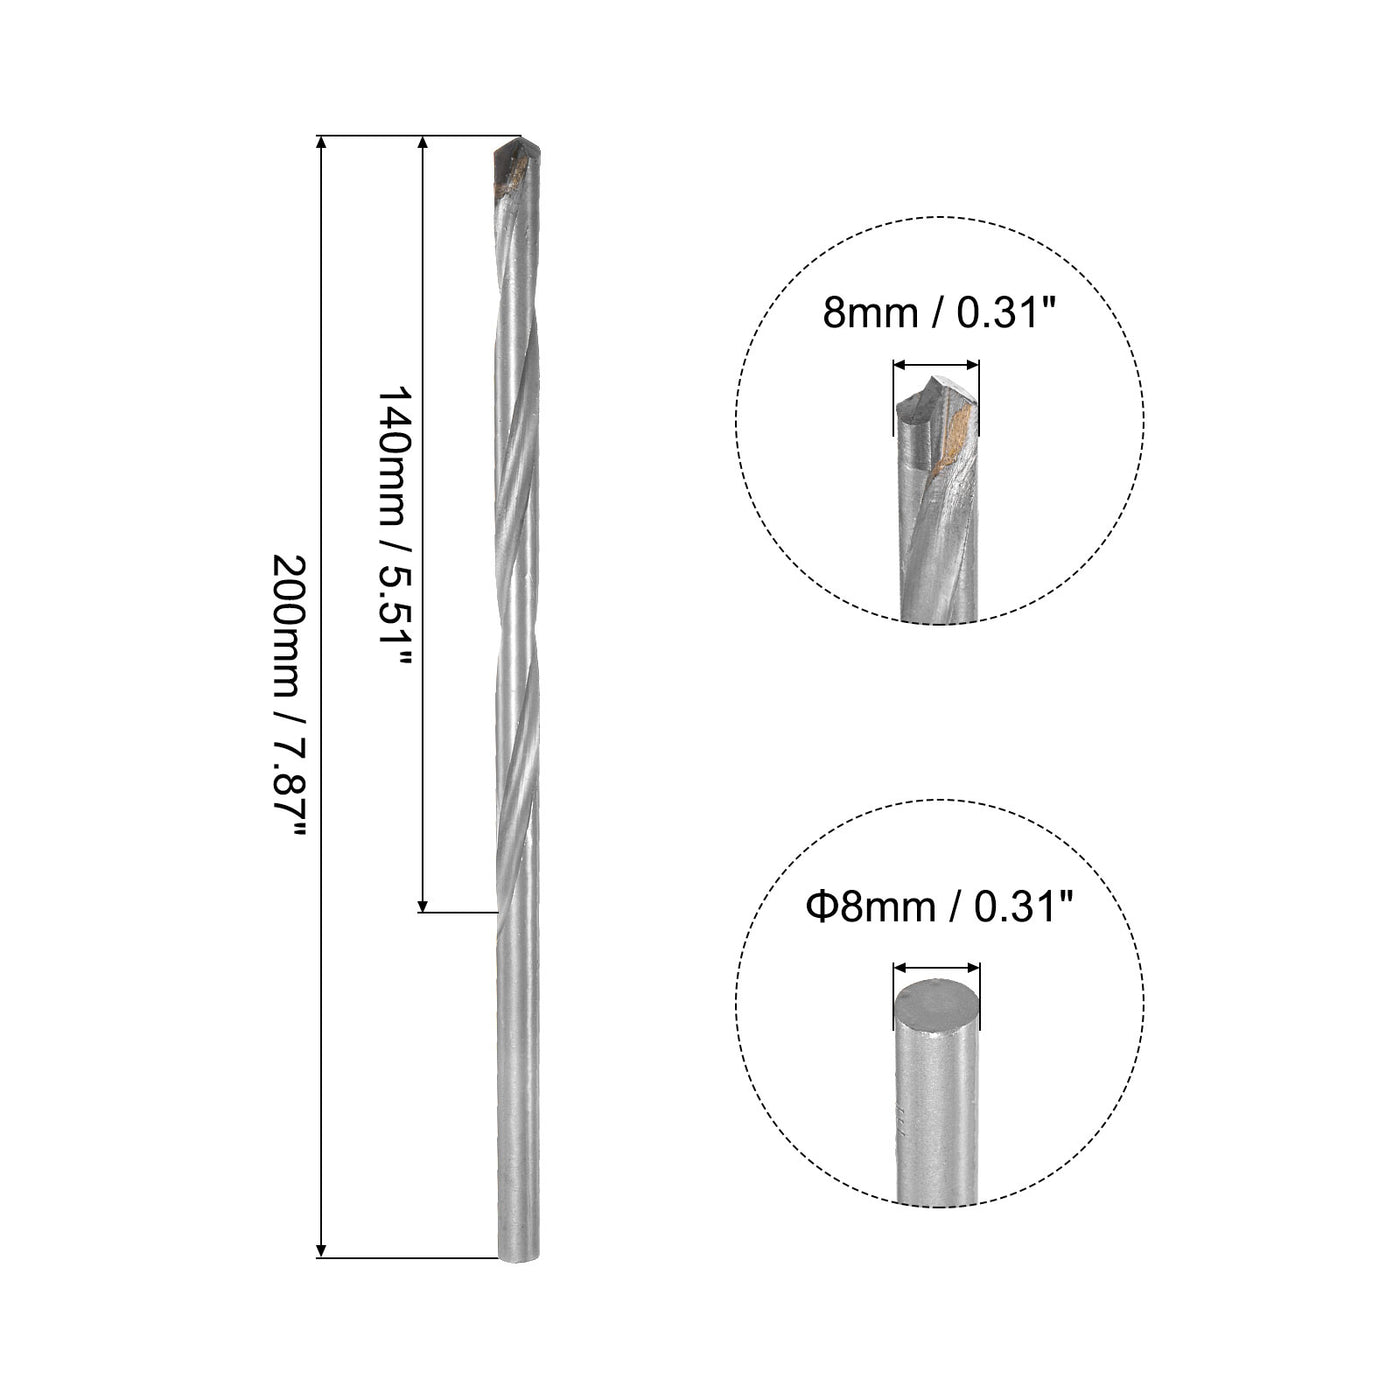 uxcell Uxcell 8mm Cutting Dia Round Shank Cemented Carbide Twist Drill Bit, 200mm Length